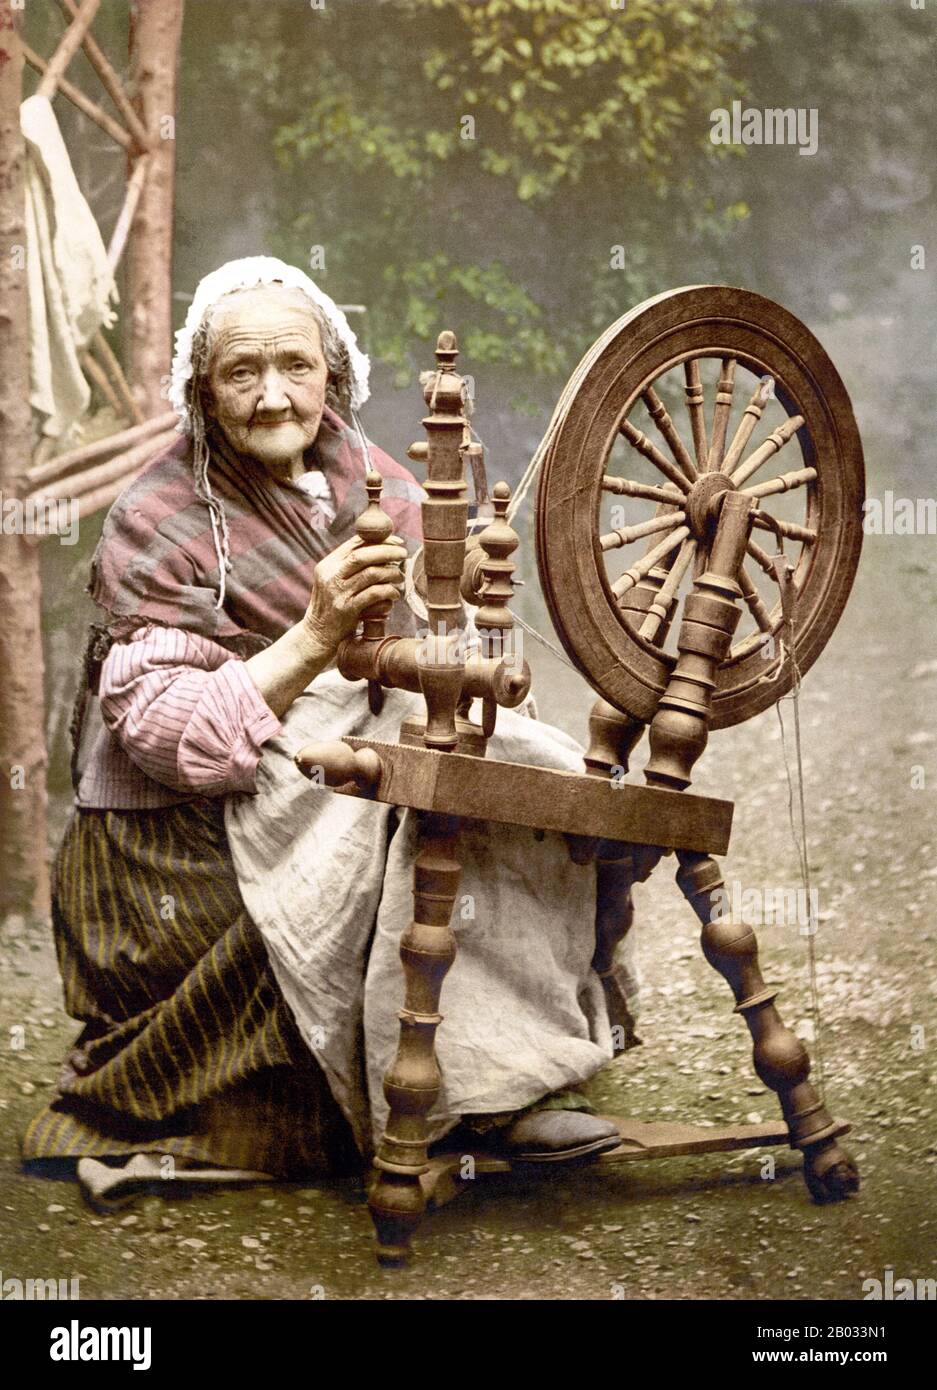 A spinning wheel is a device for spinning thread or yarn from natural or synthetic fibres. Spinning wheels appeared in China, probably in the 11th century, and very gradually replaced hand spinning with spindle and distaff.  Spinning machinery, such as the spinning jenny and spinning frame, displaced the spinning wheel during the Industrial Revolution. Stock Photo